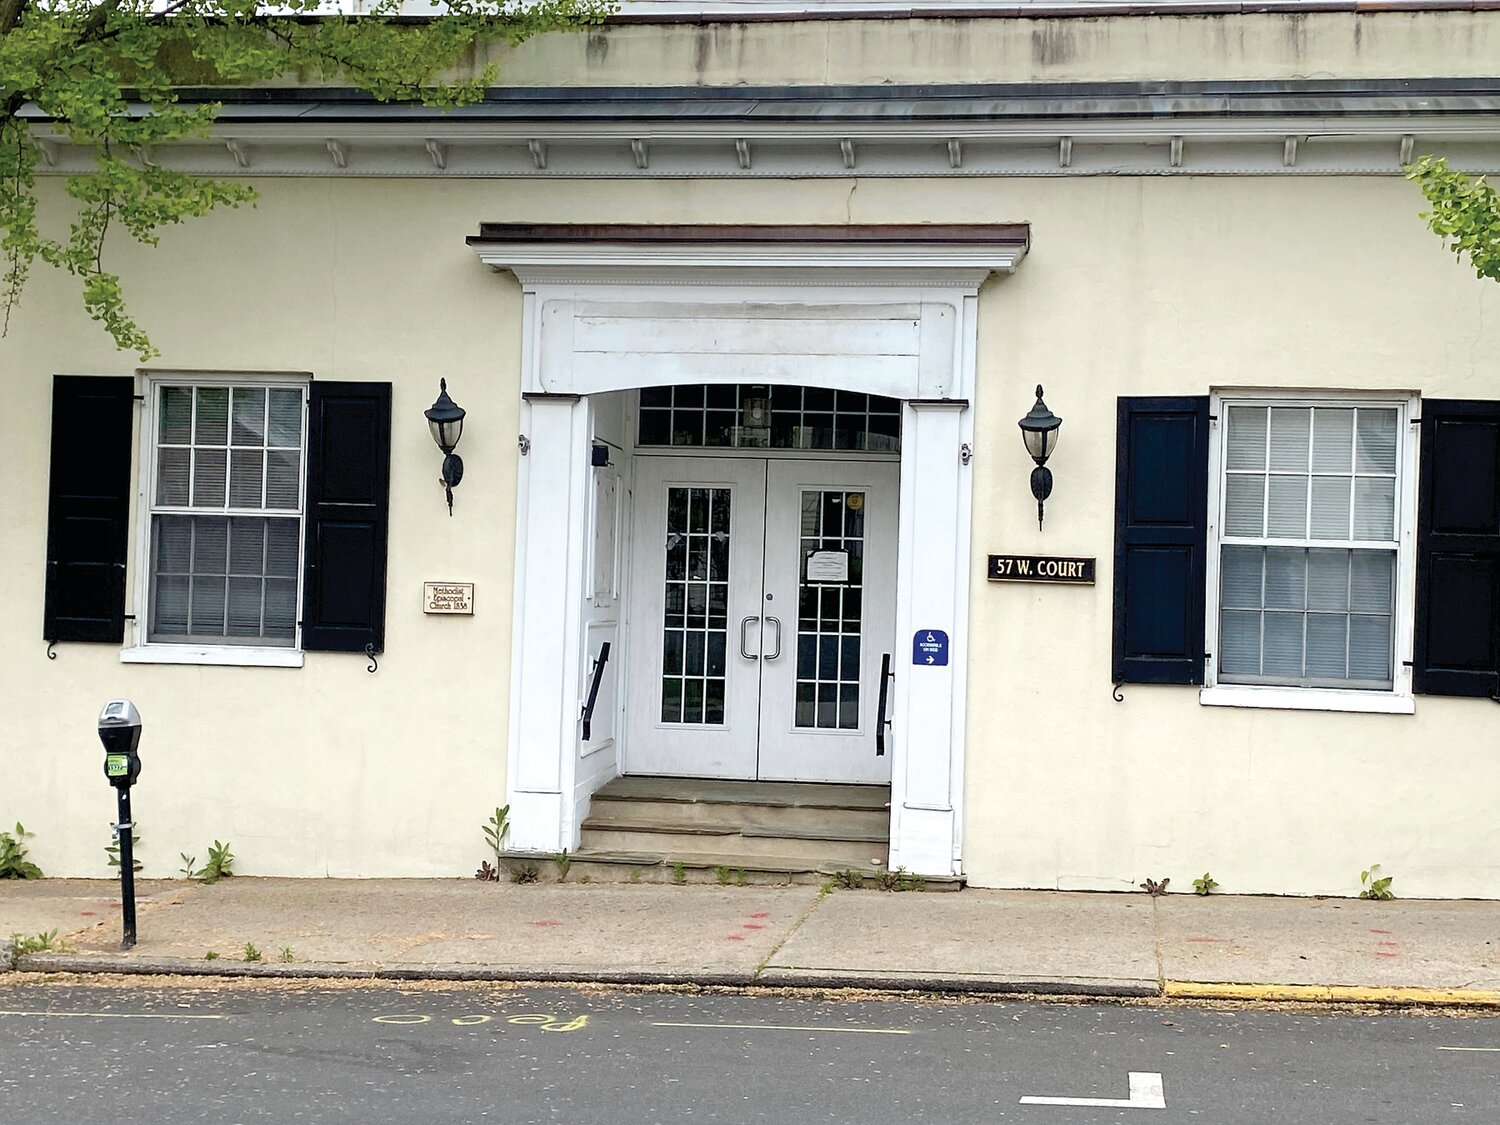 Developers looking to construct a hotel where the former Doylestown Borough Hall building stands at 57 W. Court St. are seeking a demolition permit to clear the site.